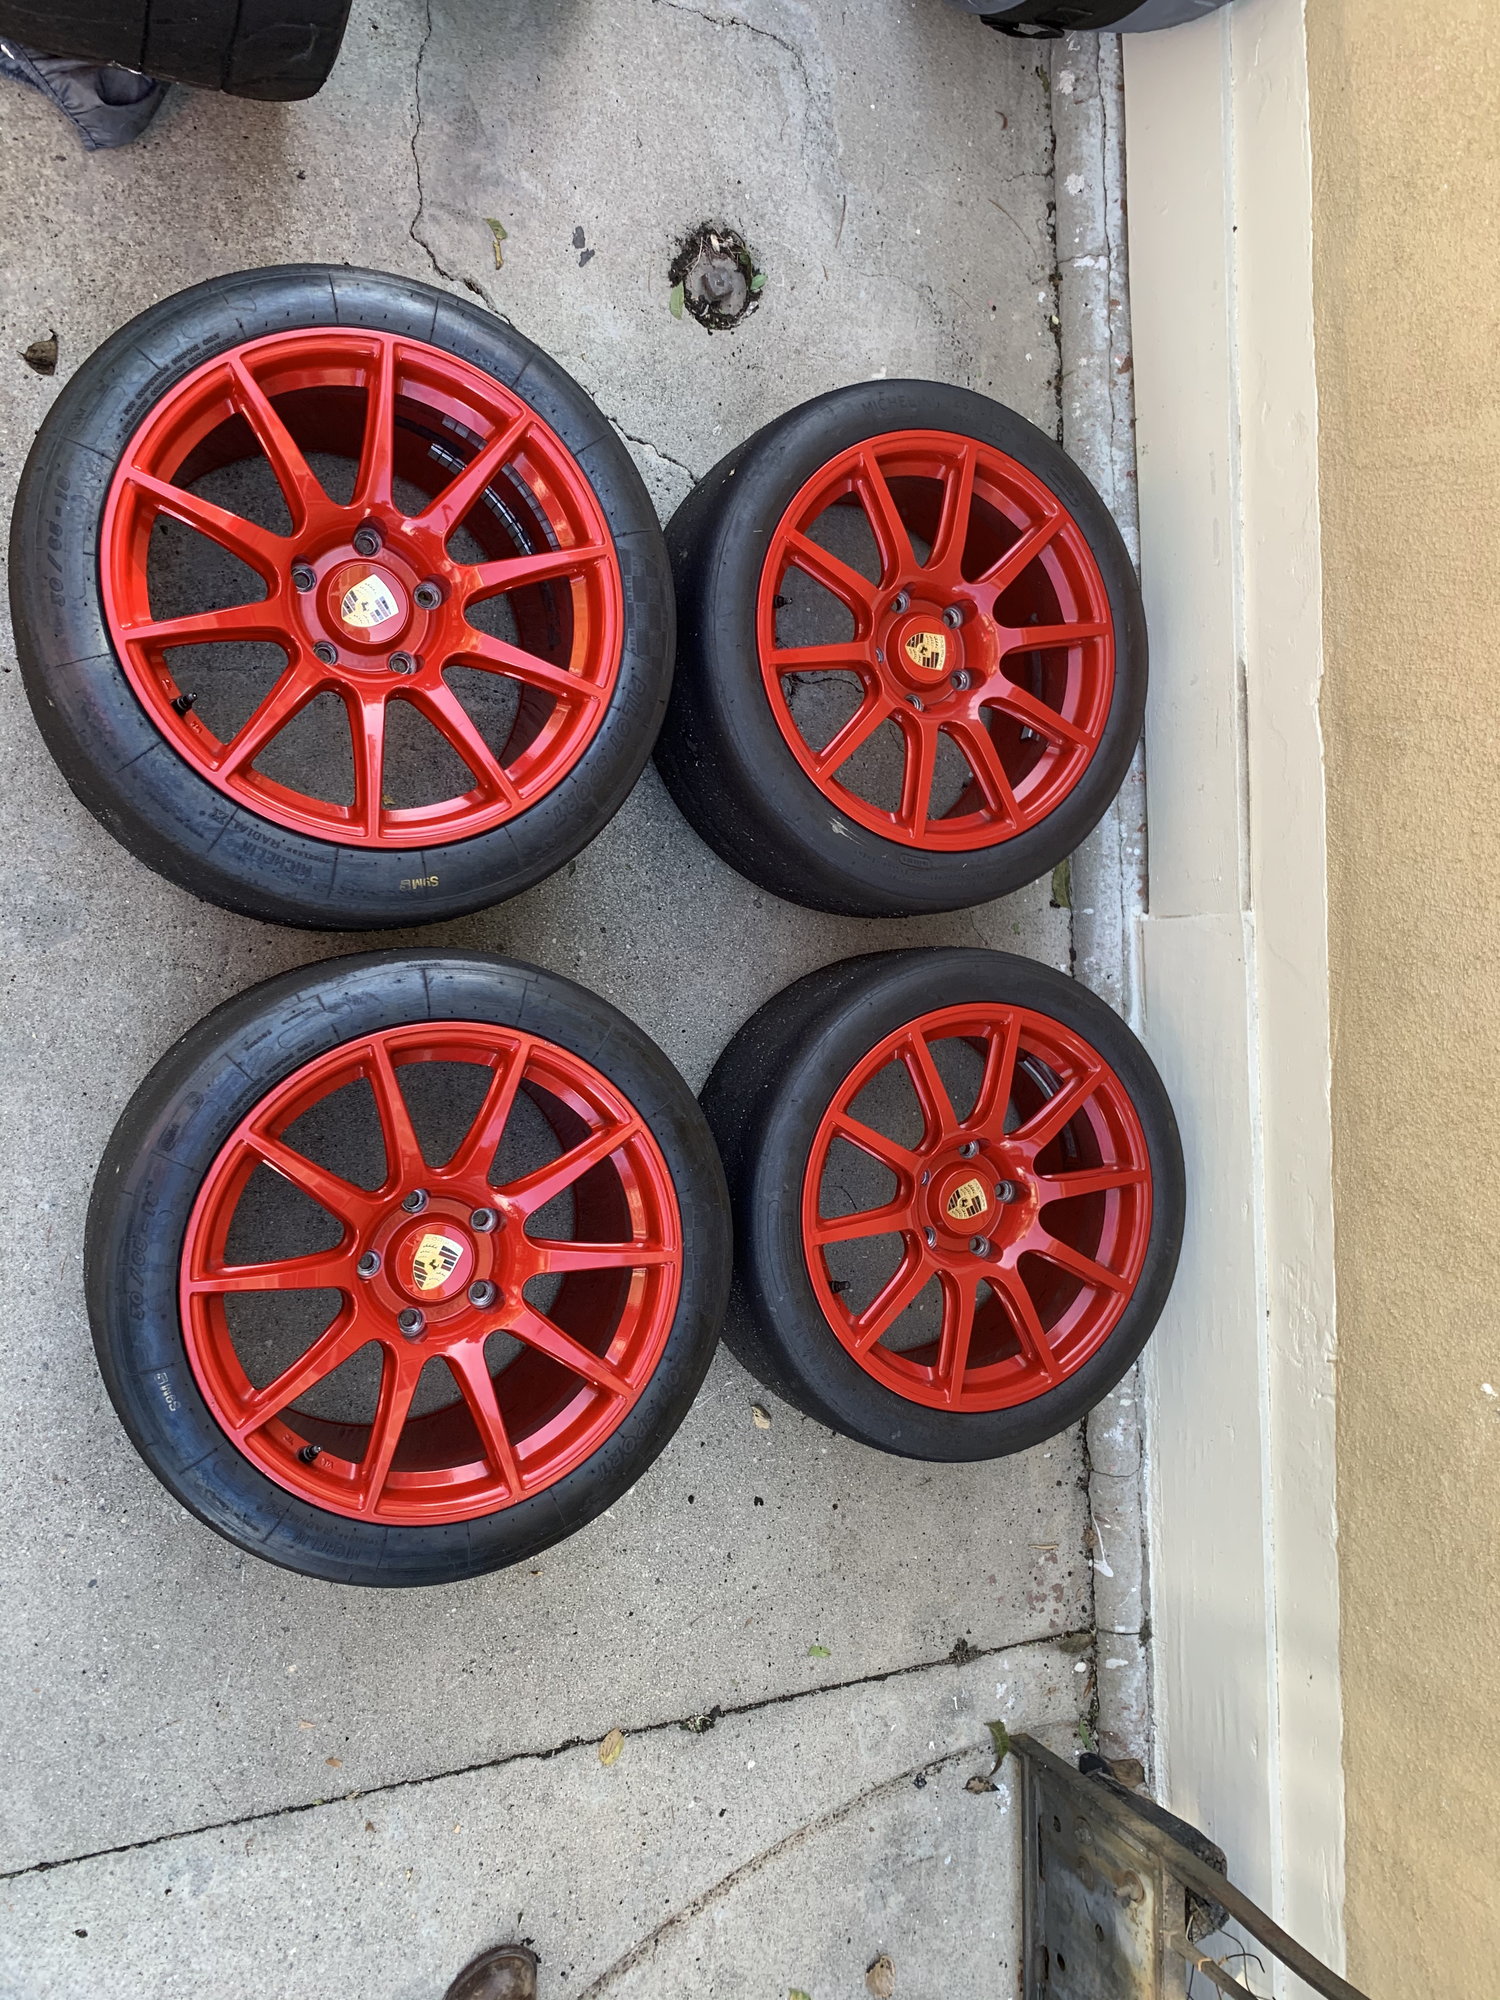 Wheels and Tires/Axles - APEX SM10 - 18x9 18x12 / Michelin slicks -Porsche 911 997 track wheels - Used - 1999 to 2012 Porsche All Models - Los Angeles, CA 90018, United States